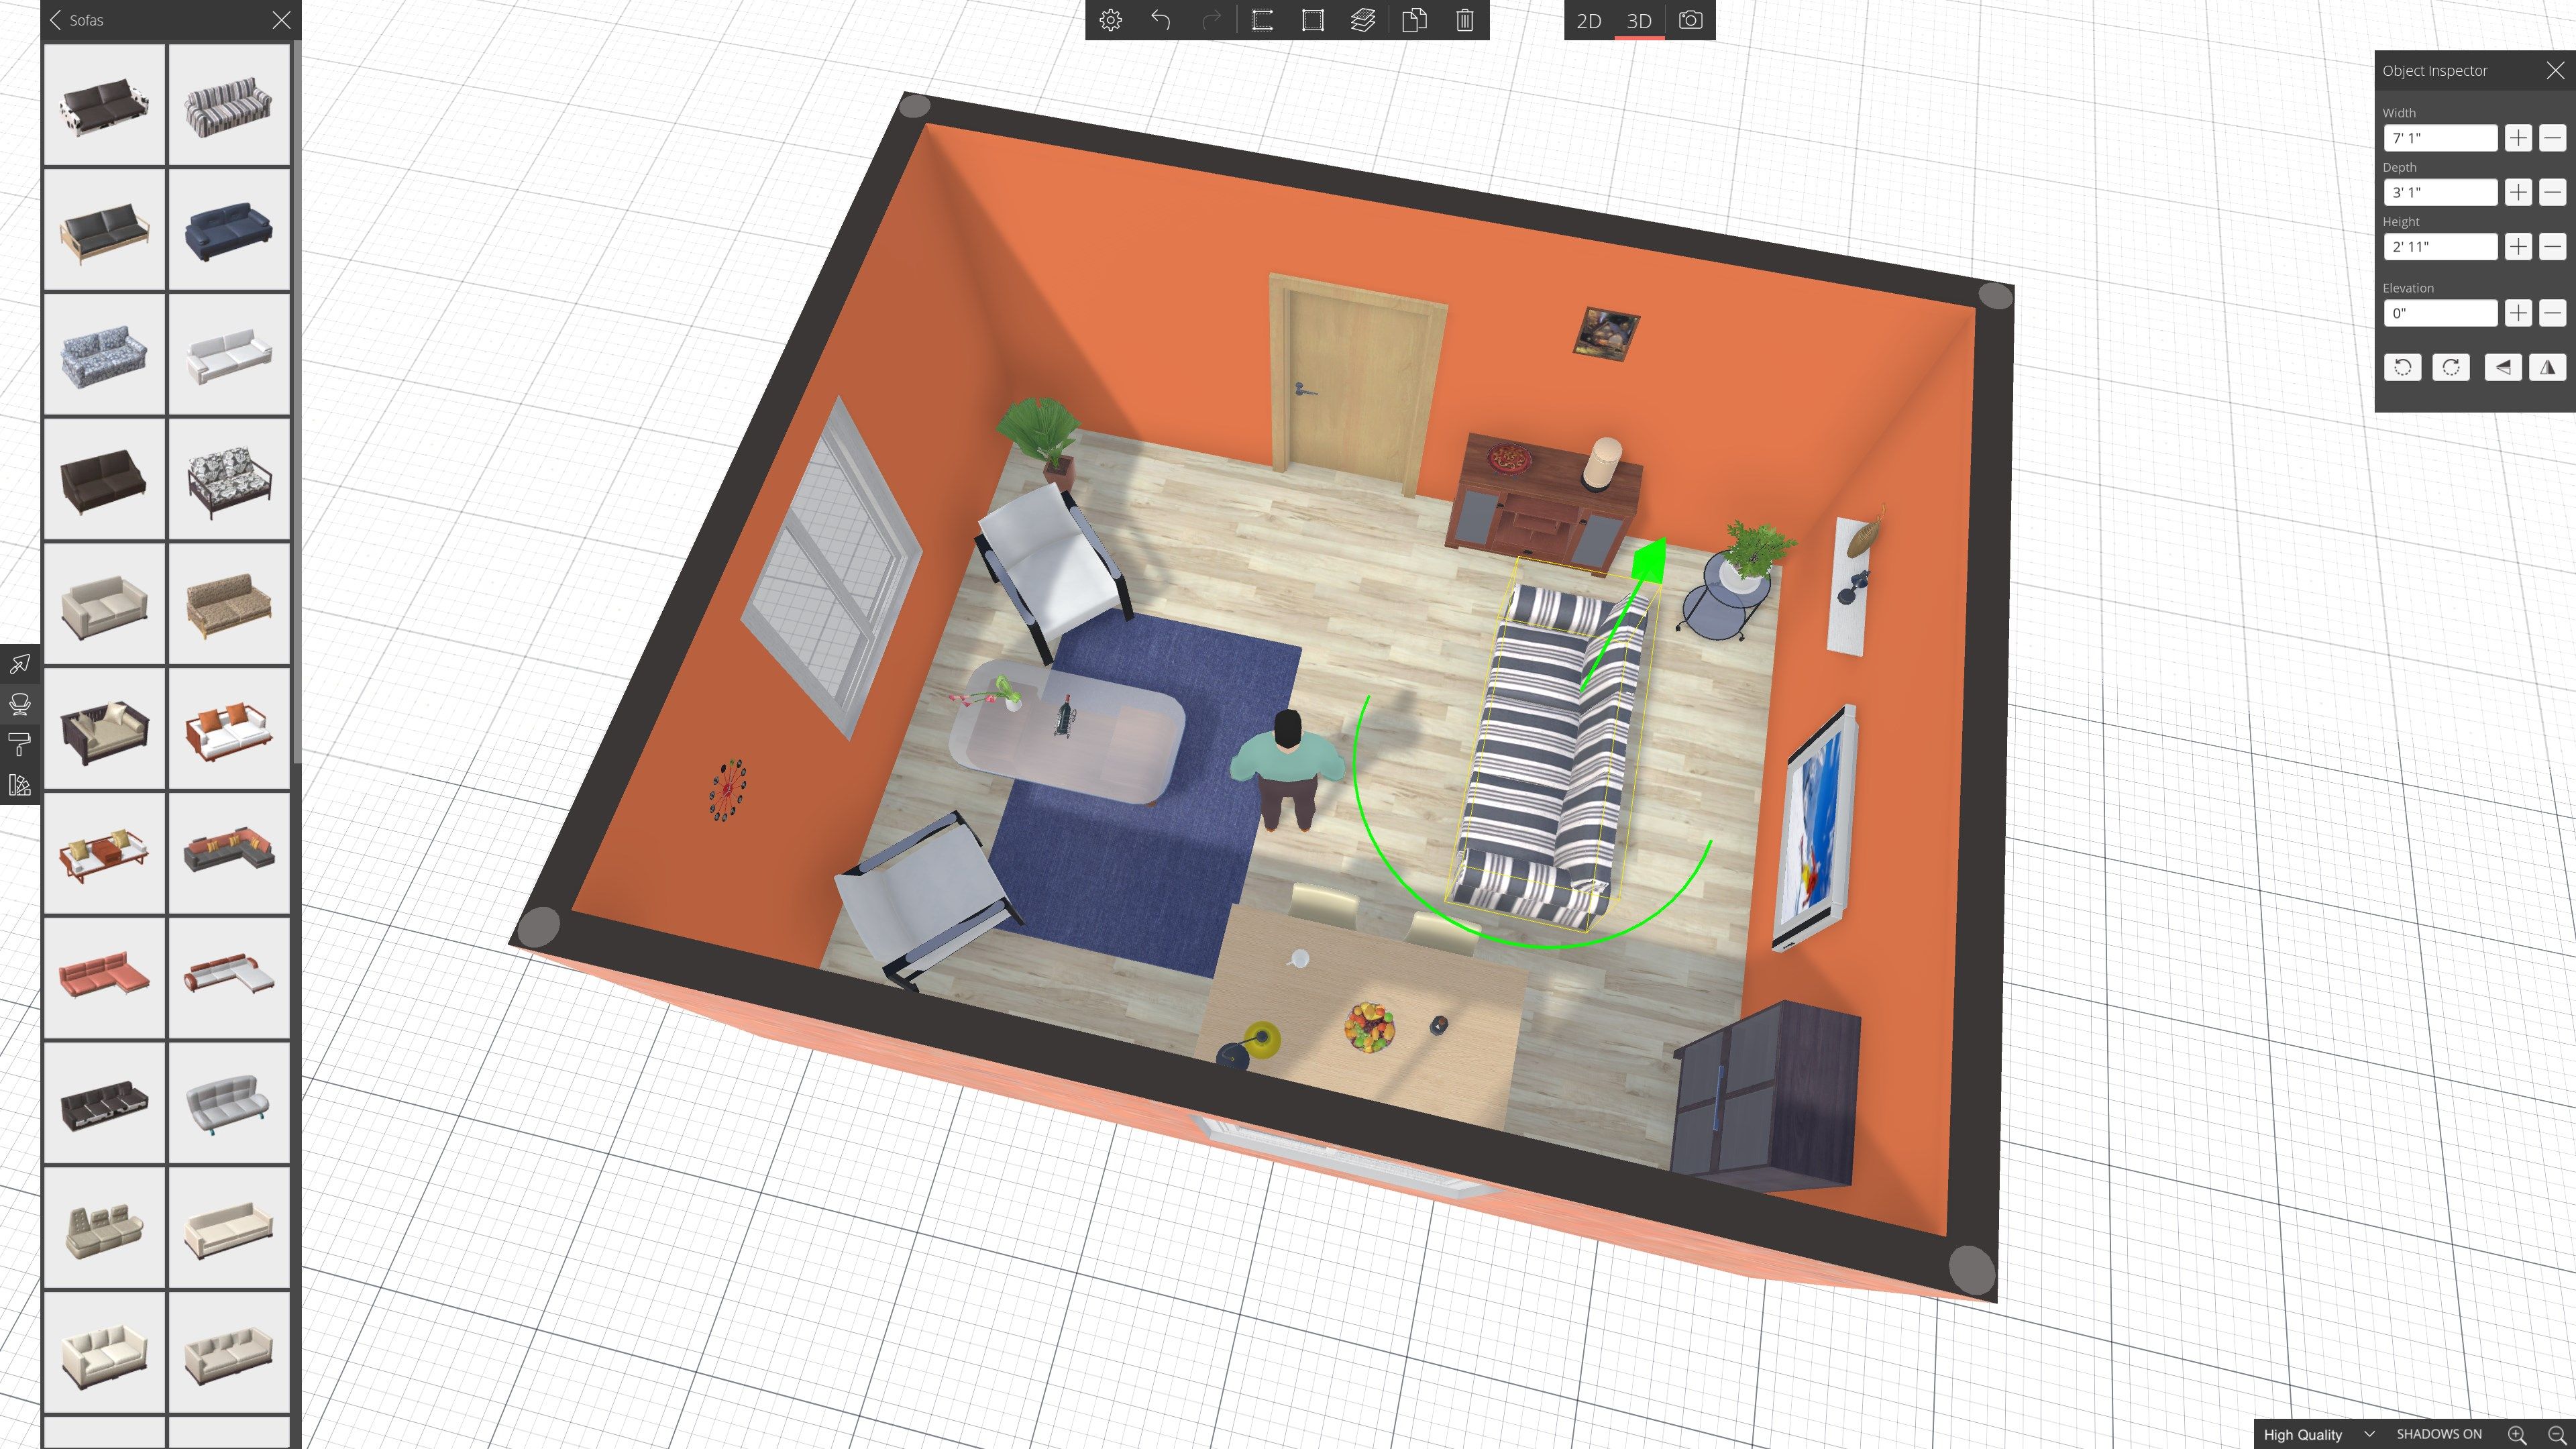 And even in 3D view